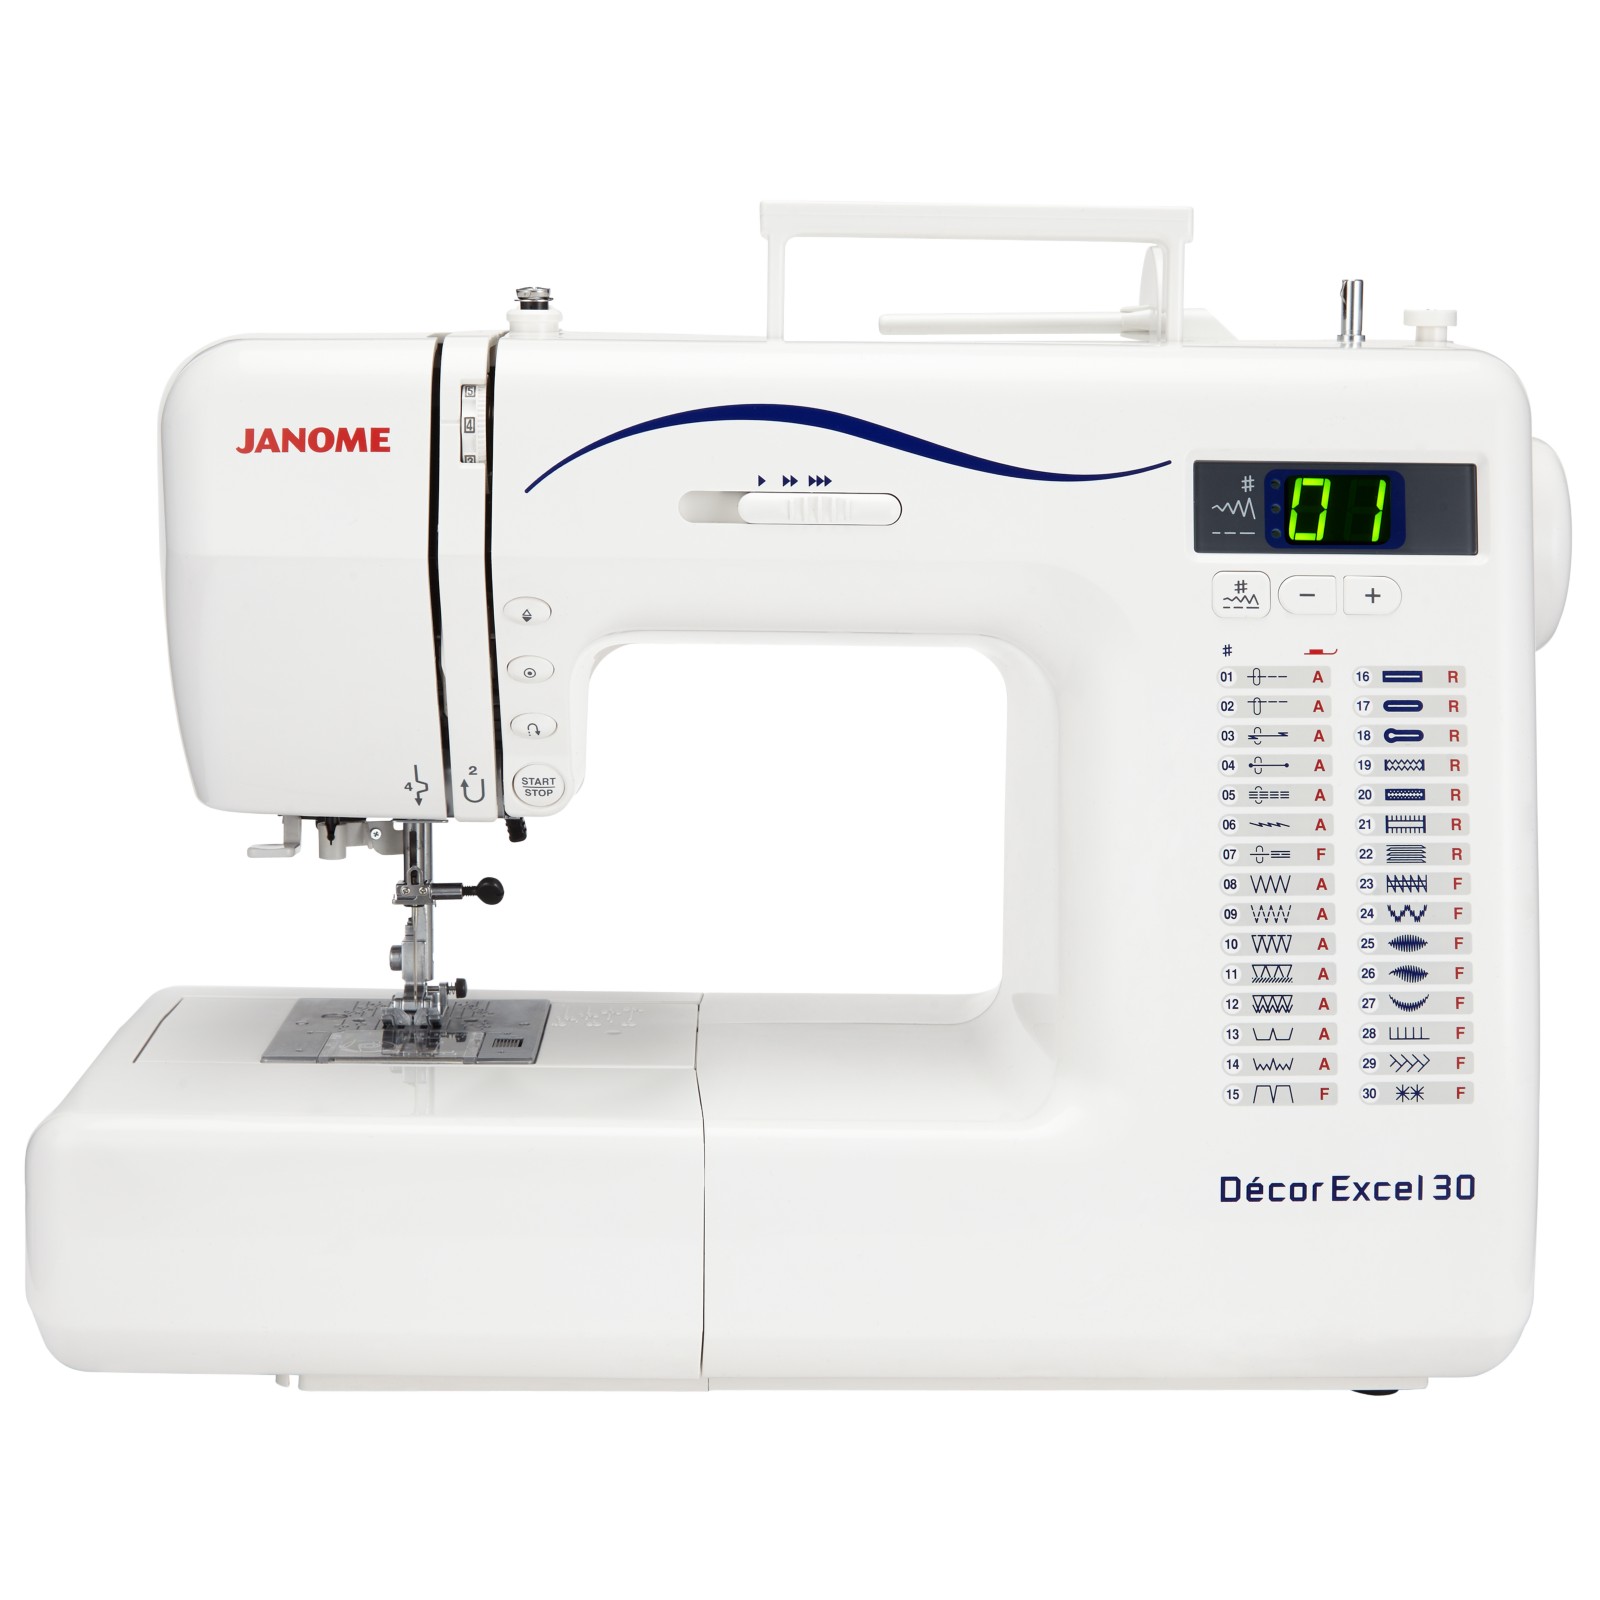 For Janome Dmx300 Deluxe Sewing Machine Product No Longer Available